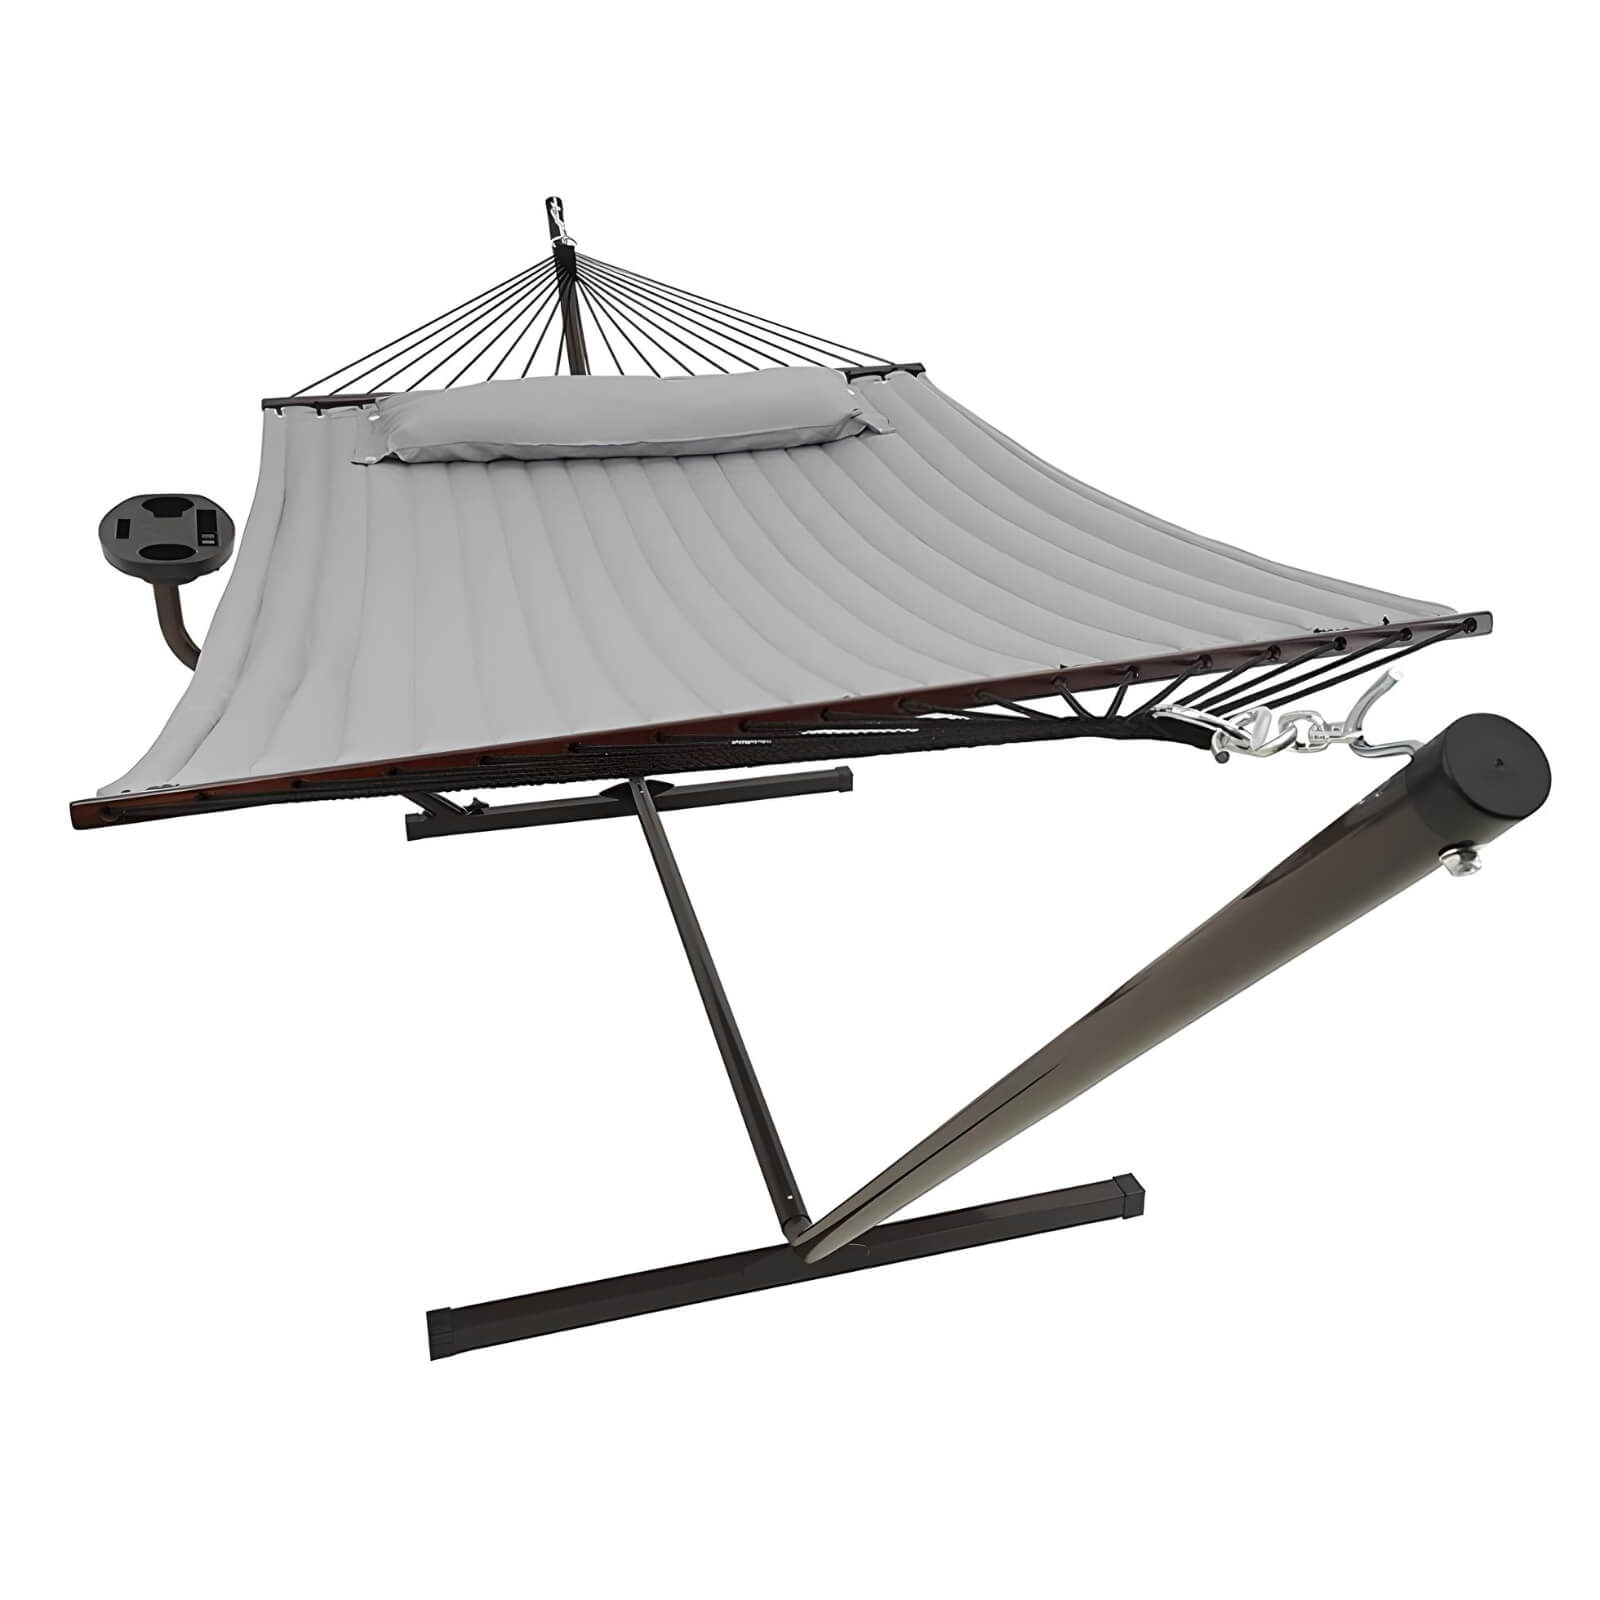    hammock-with-double-out-door-hammock-with-stand